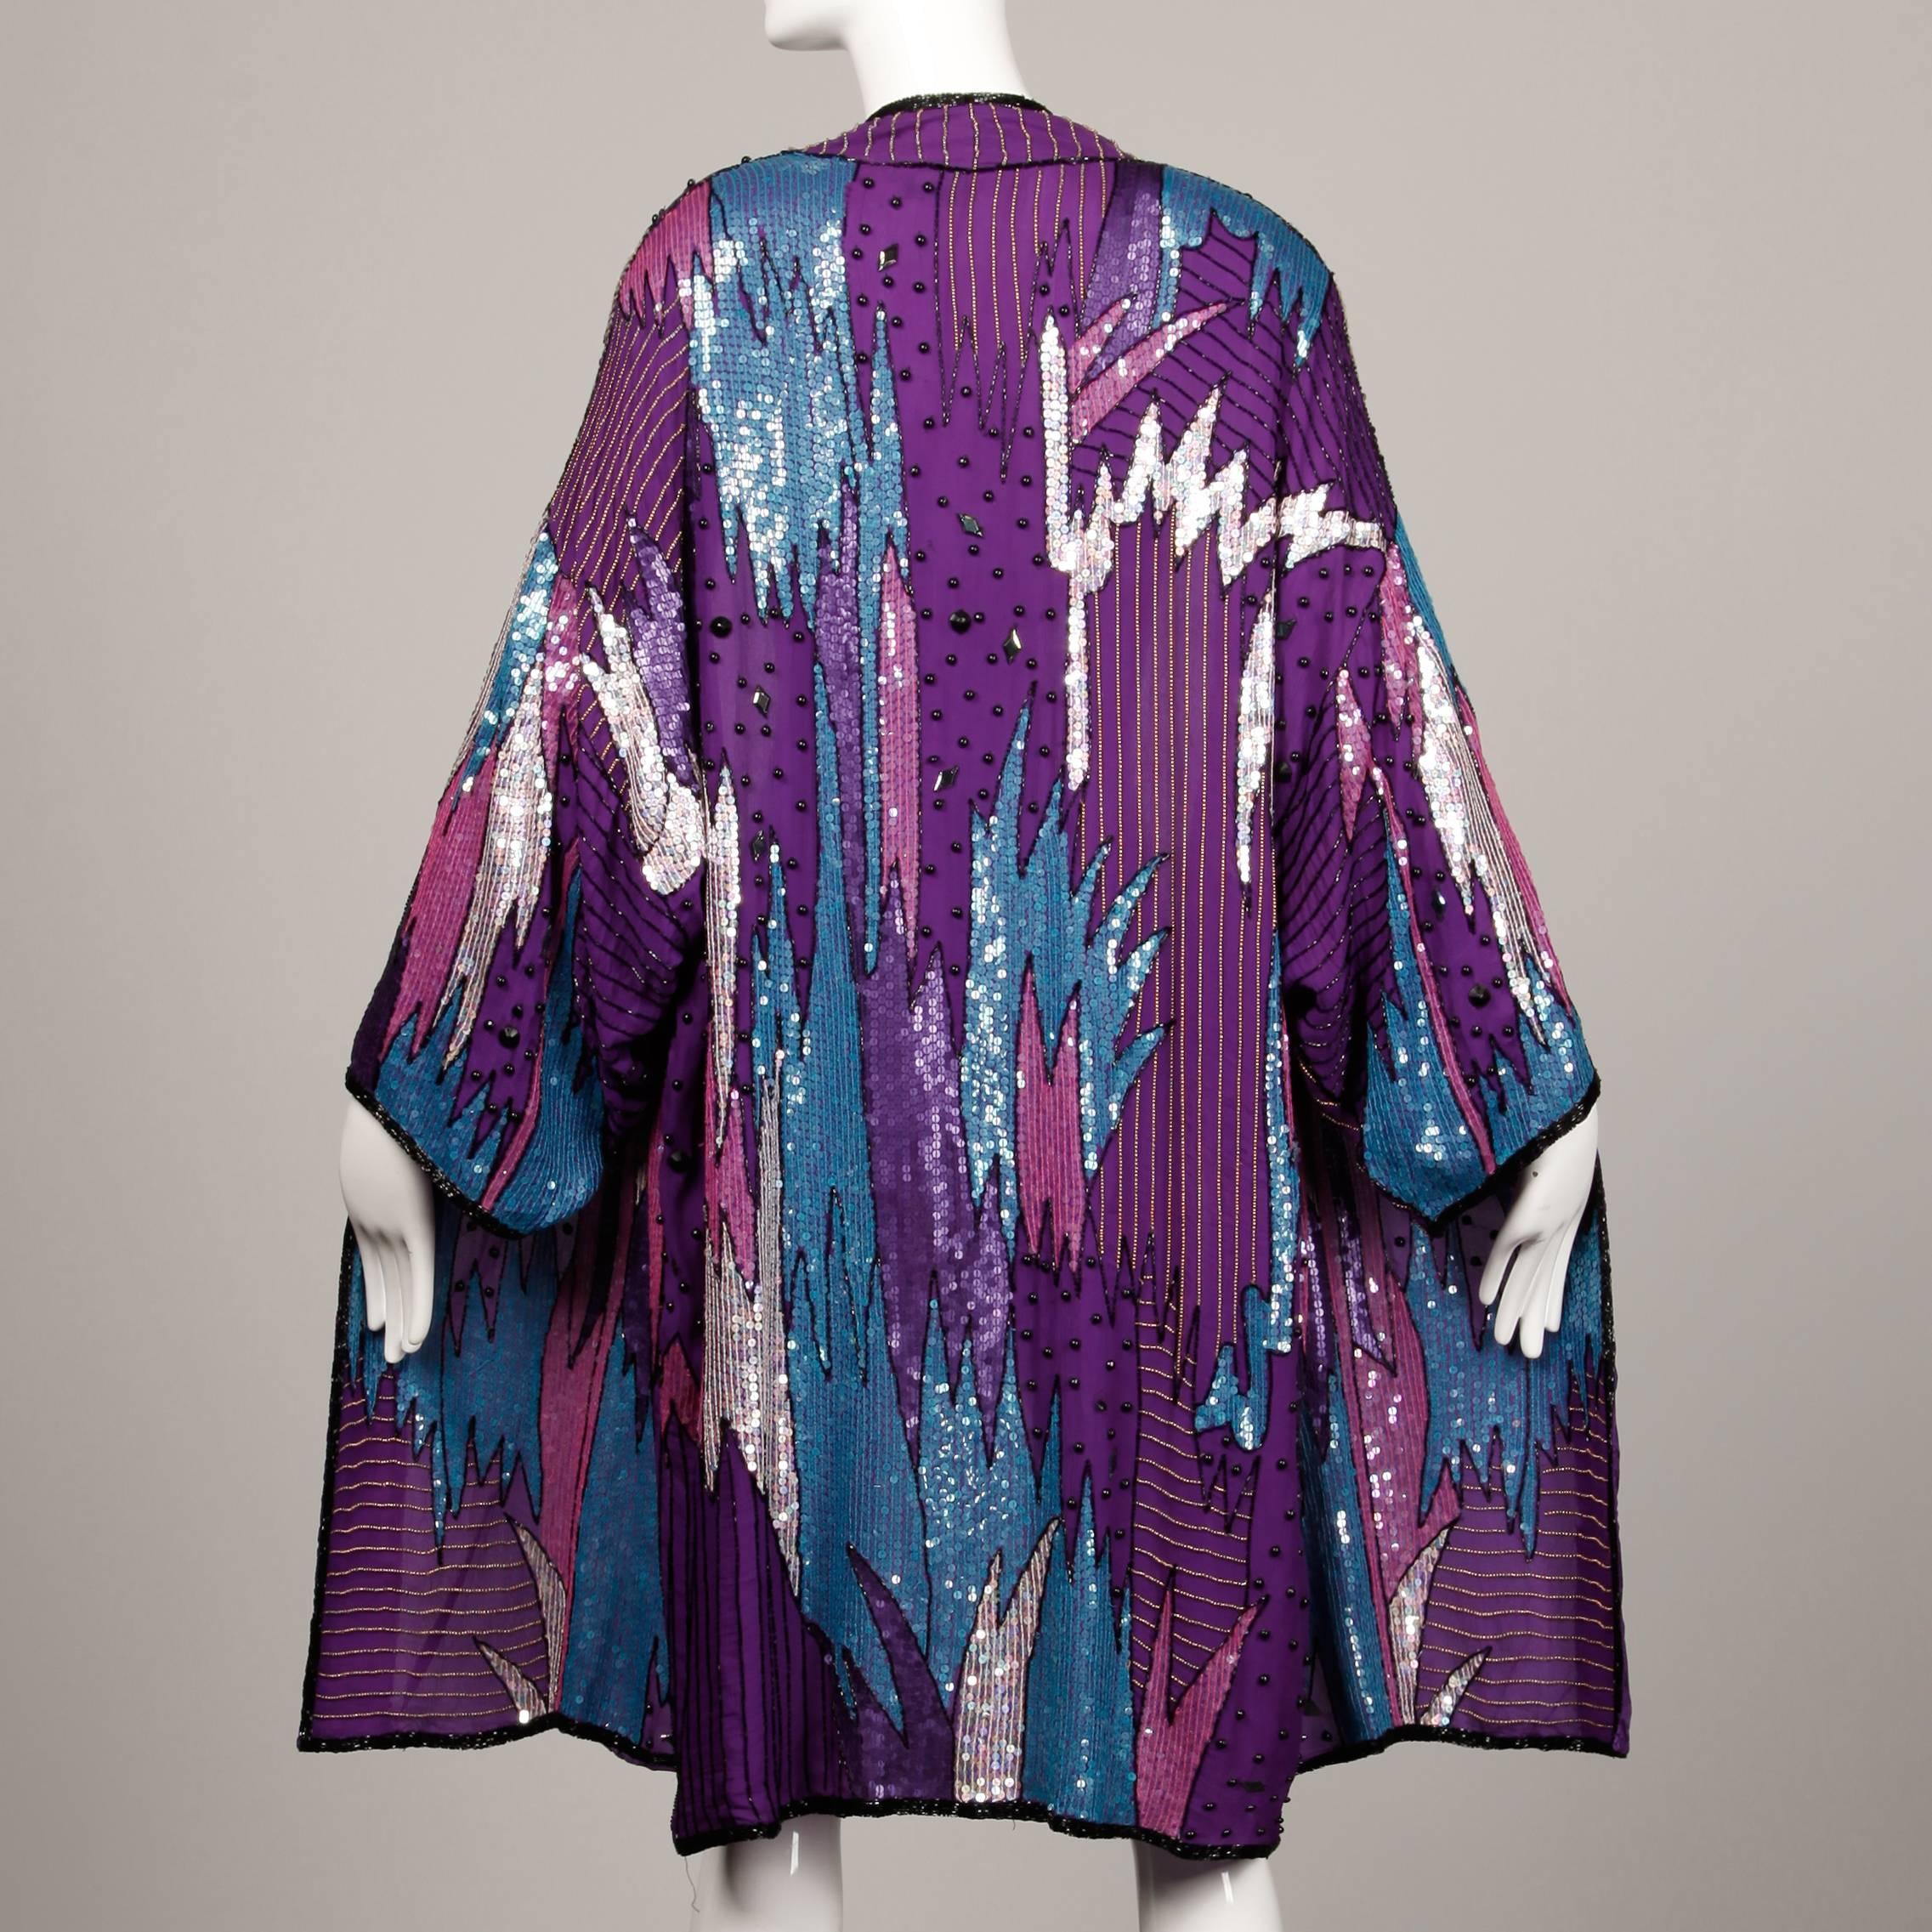 Elaborately beaded silk duster jacket by Judith Ann with an oversized fit. Stunning vibrant design. Fully lined in silk. No closure/ hangs open. The marked size is medium, but it should fit sizes XS-XL due to the oversized fit. The bust, waist and